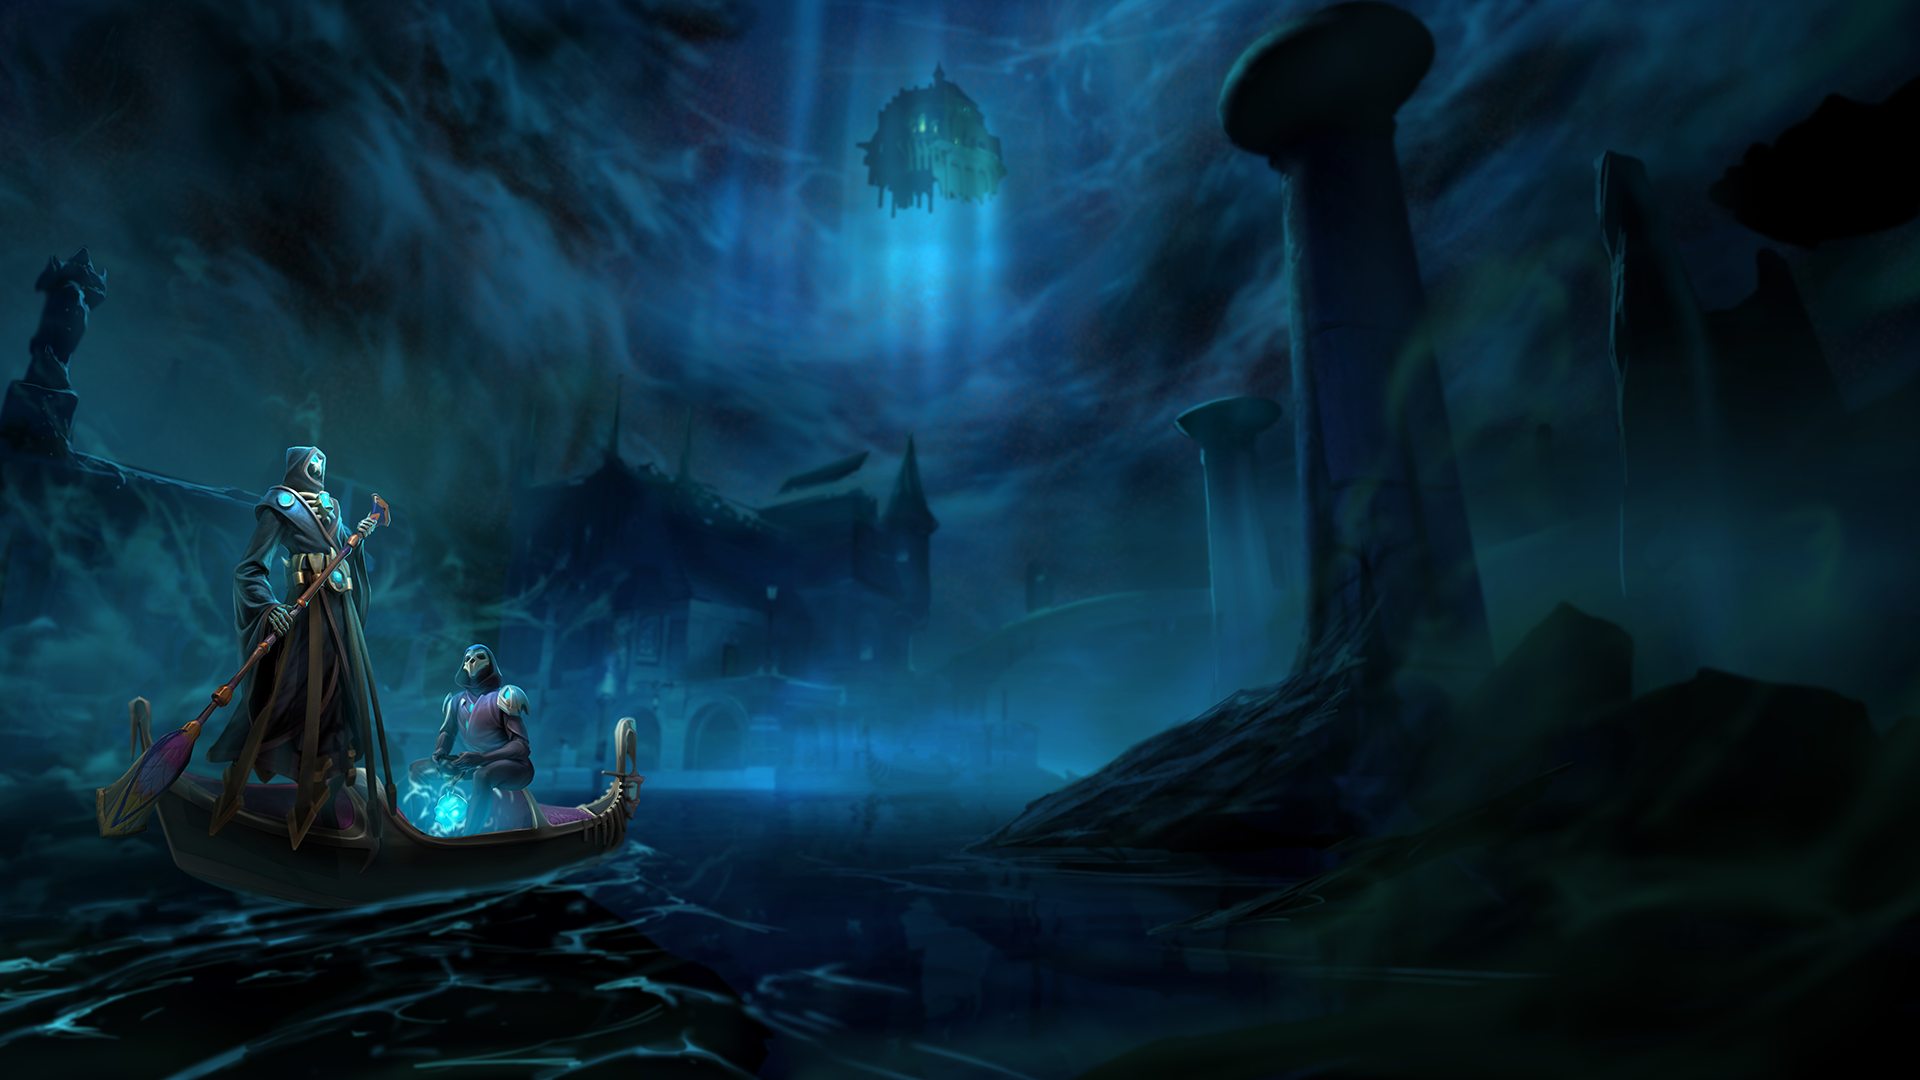 Runescape PC Gaming Video Game Characters Video Game Art Boat Video Games Water Sky Clouds 1920x1080